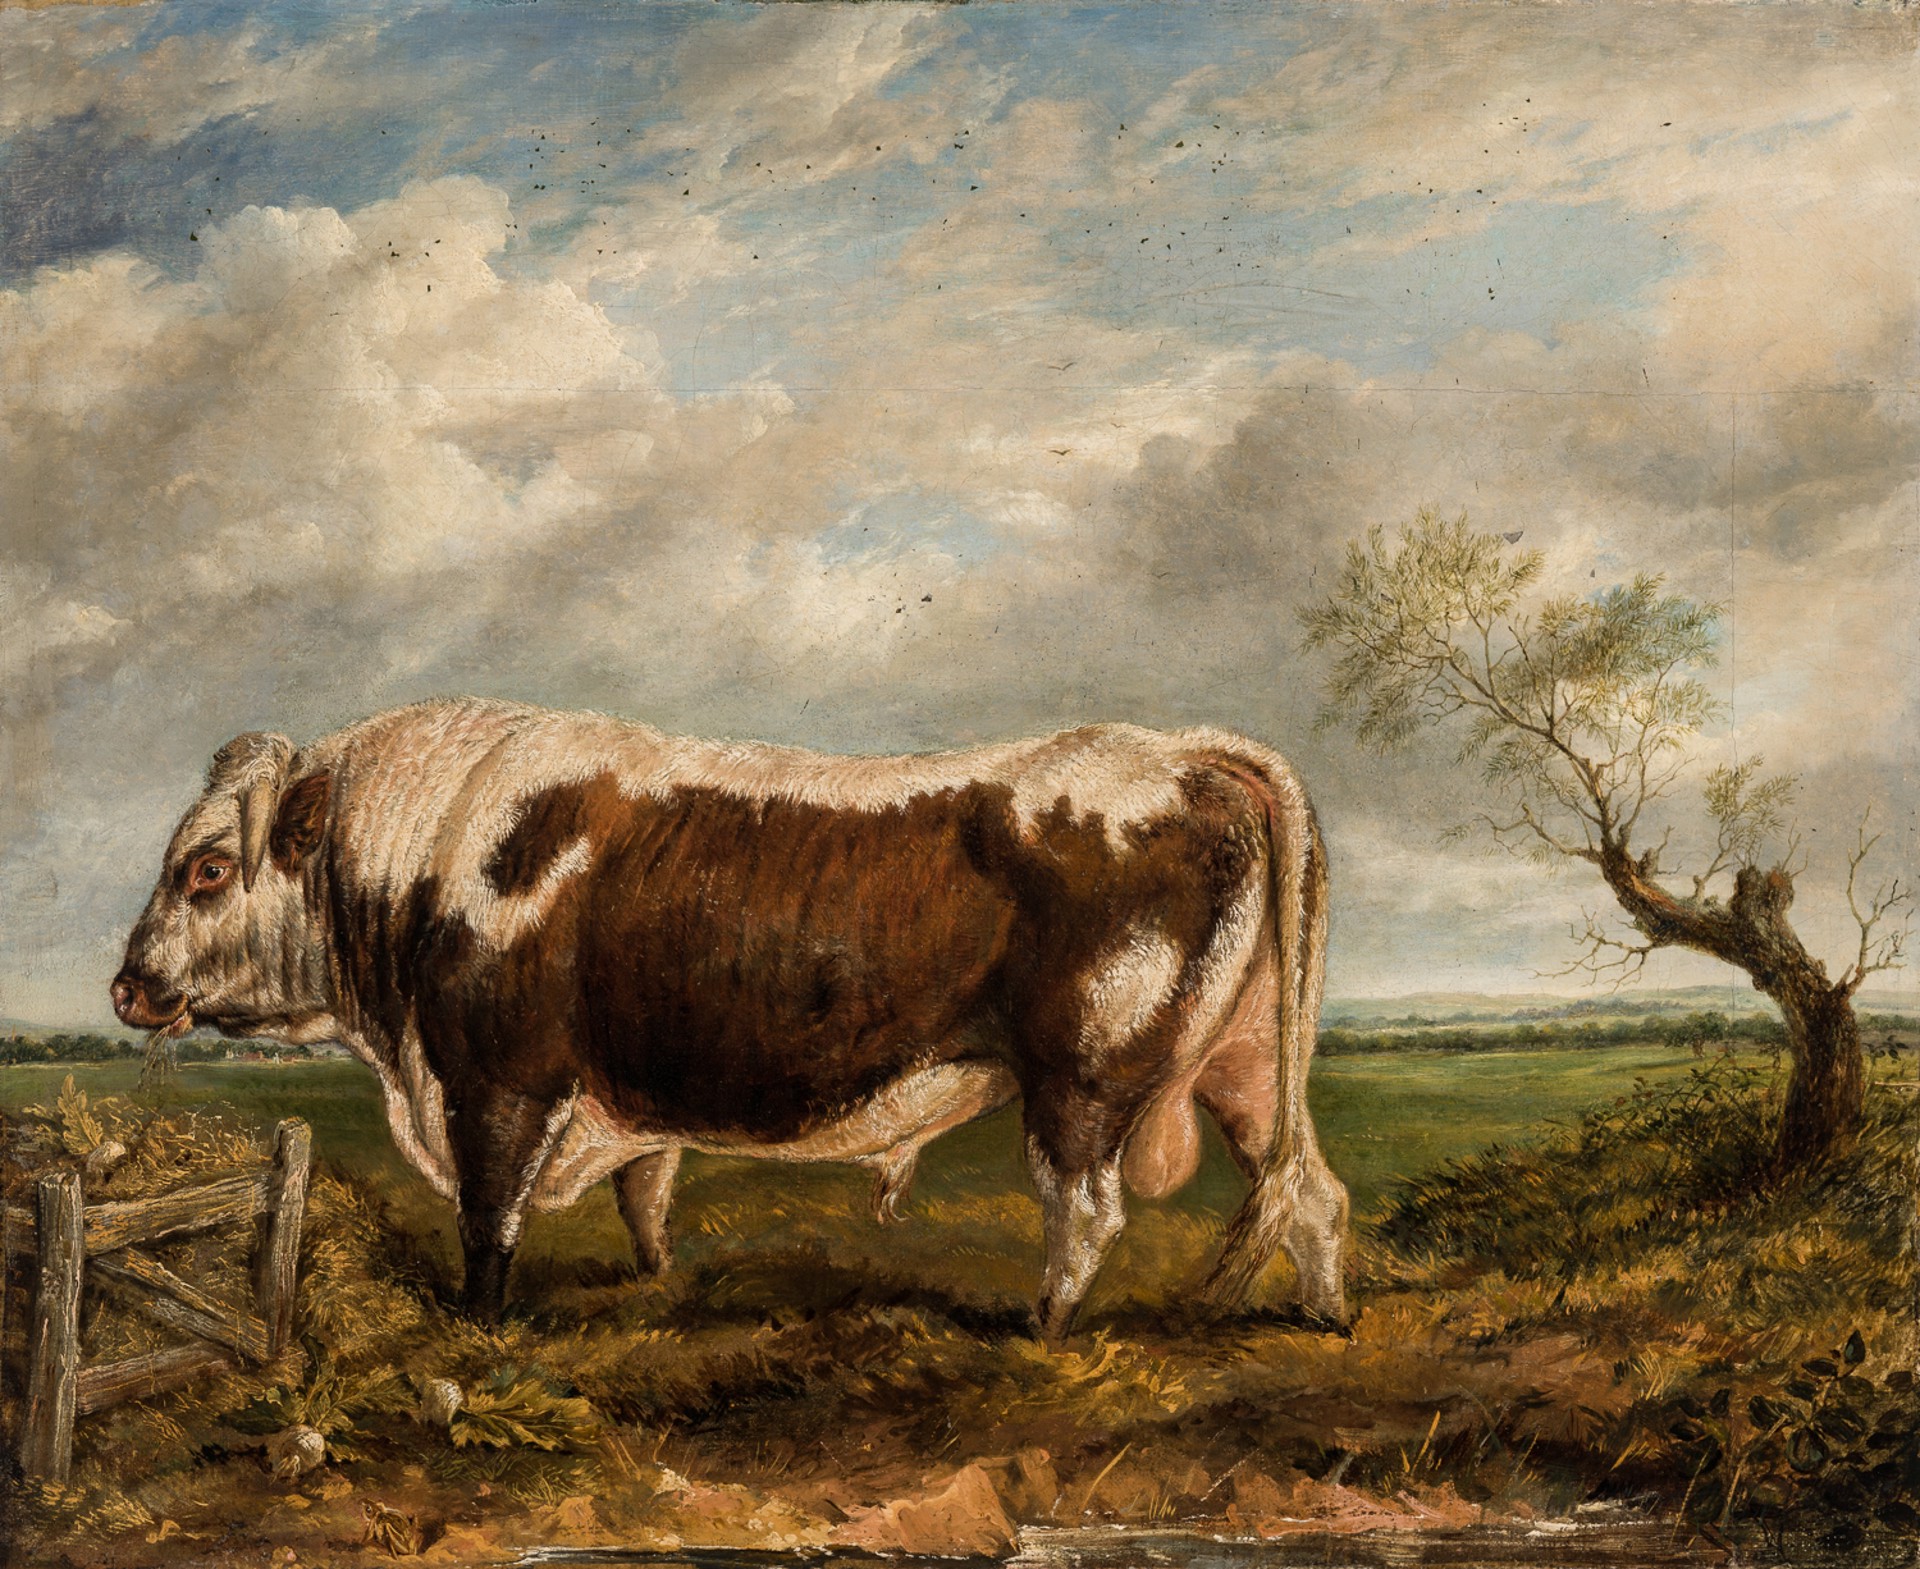 THE BULL AND THE FROG by Sir Edwin Landseer